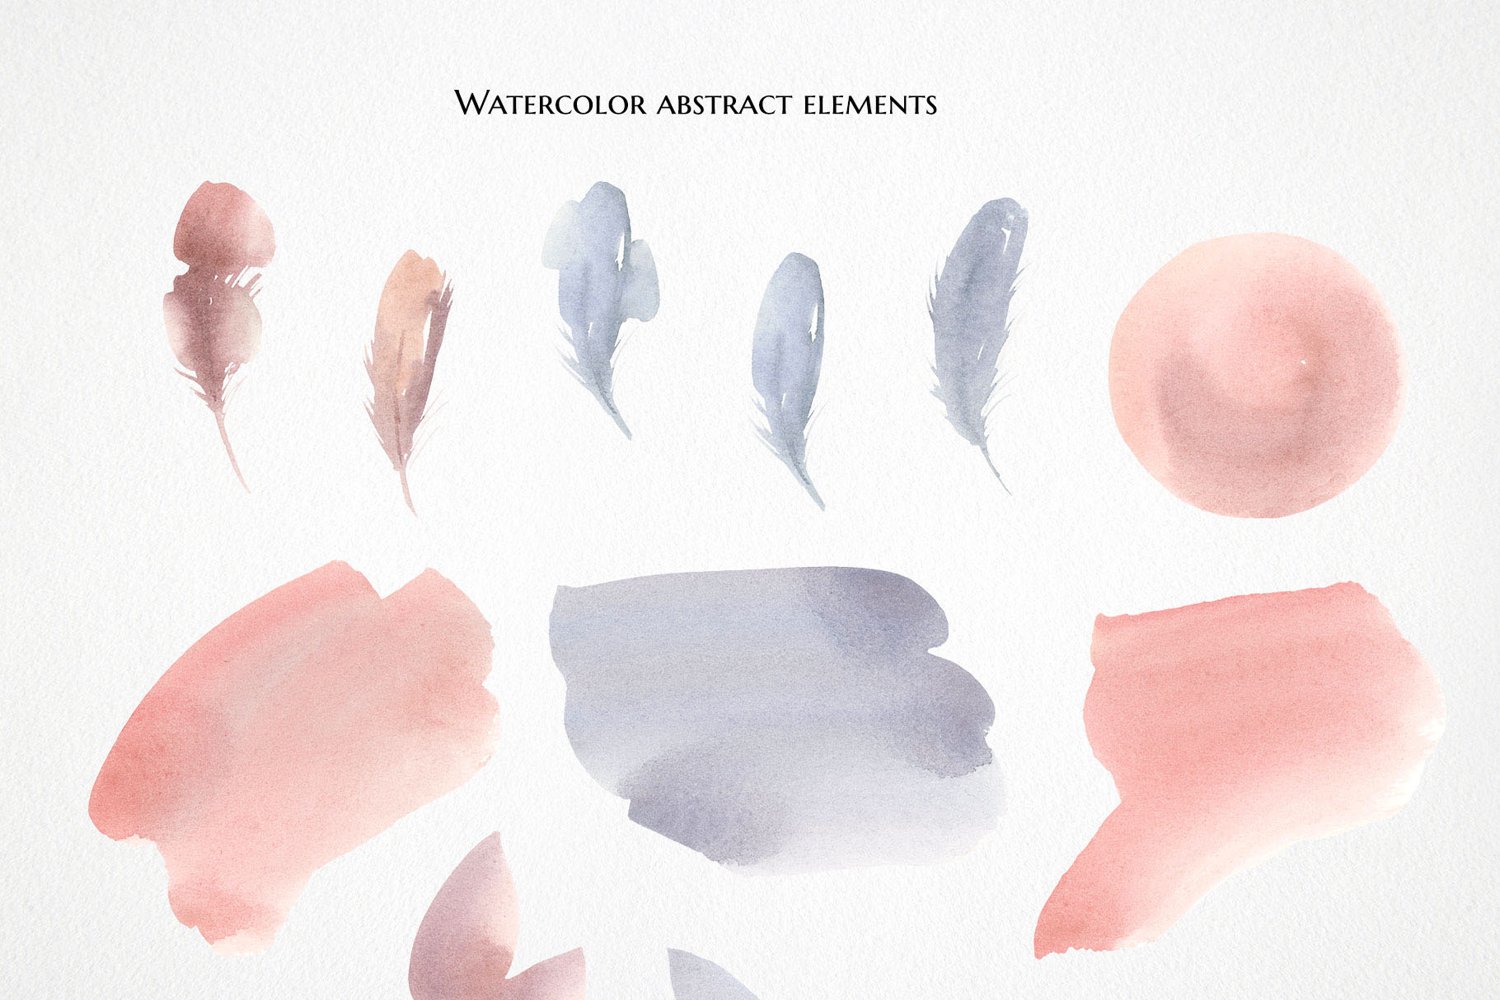 This set includes watercolor abstract elements.